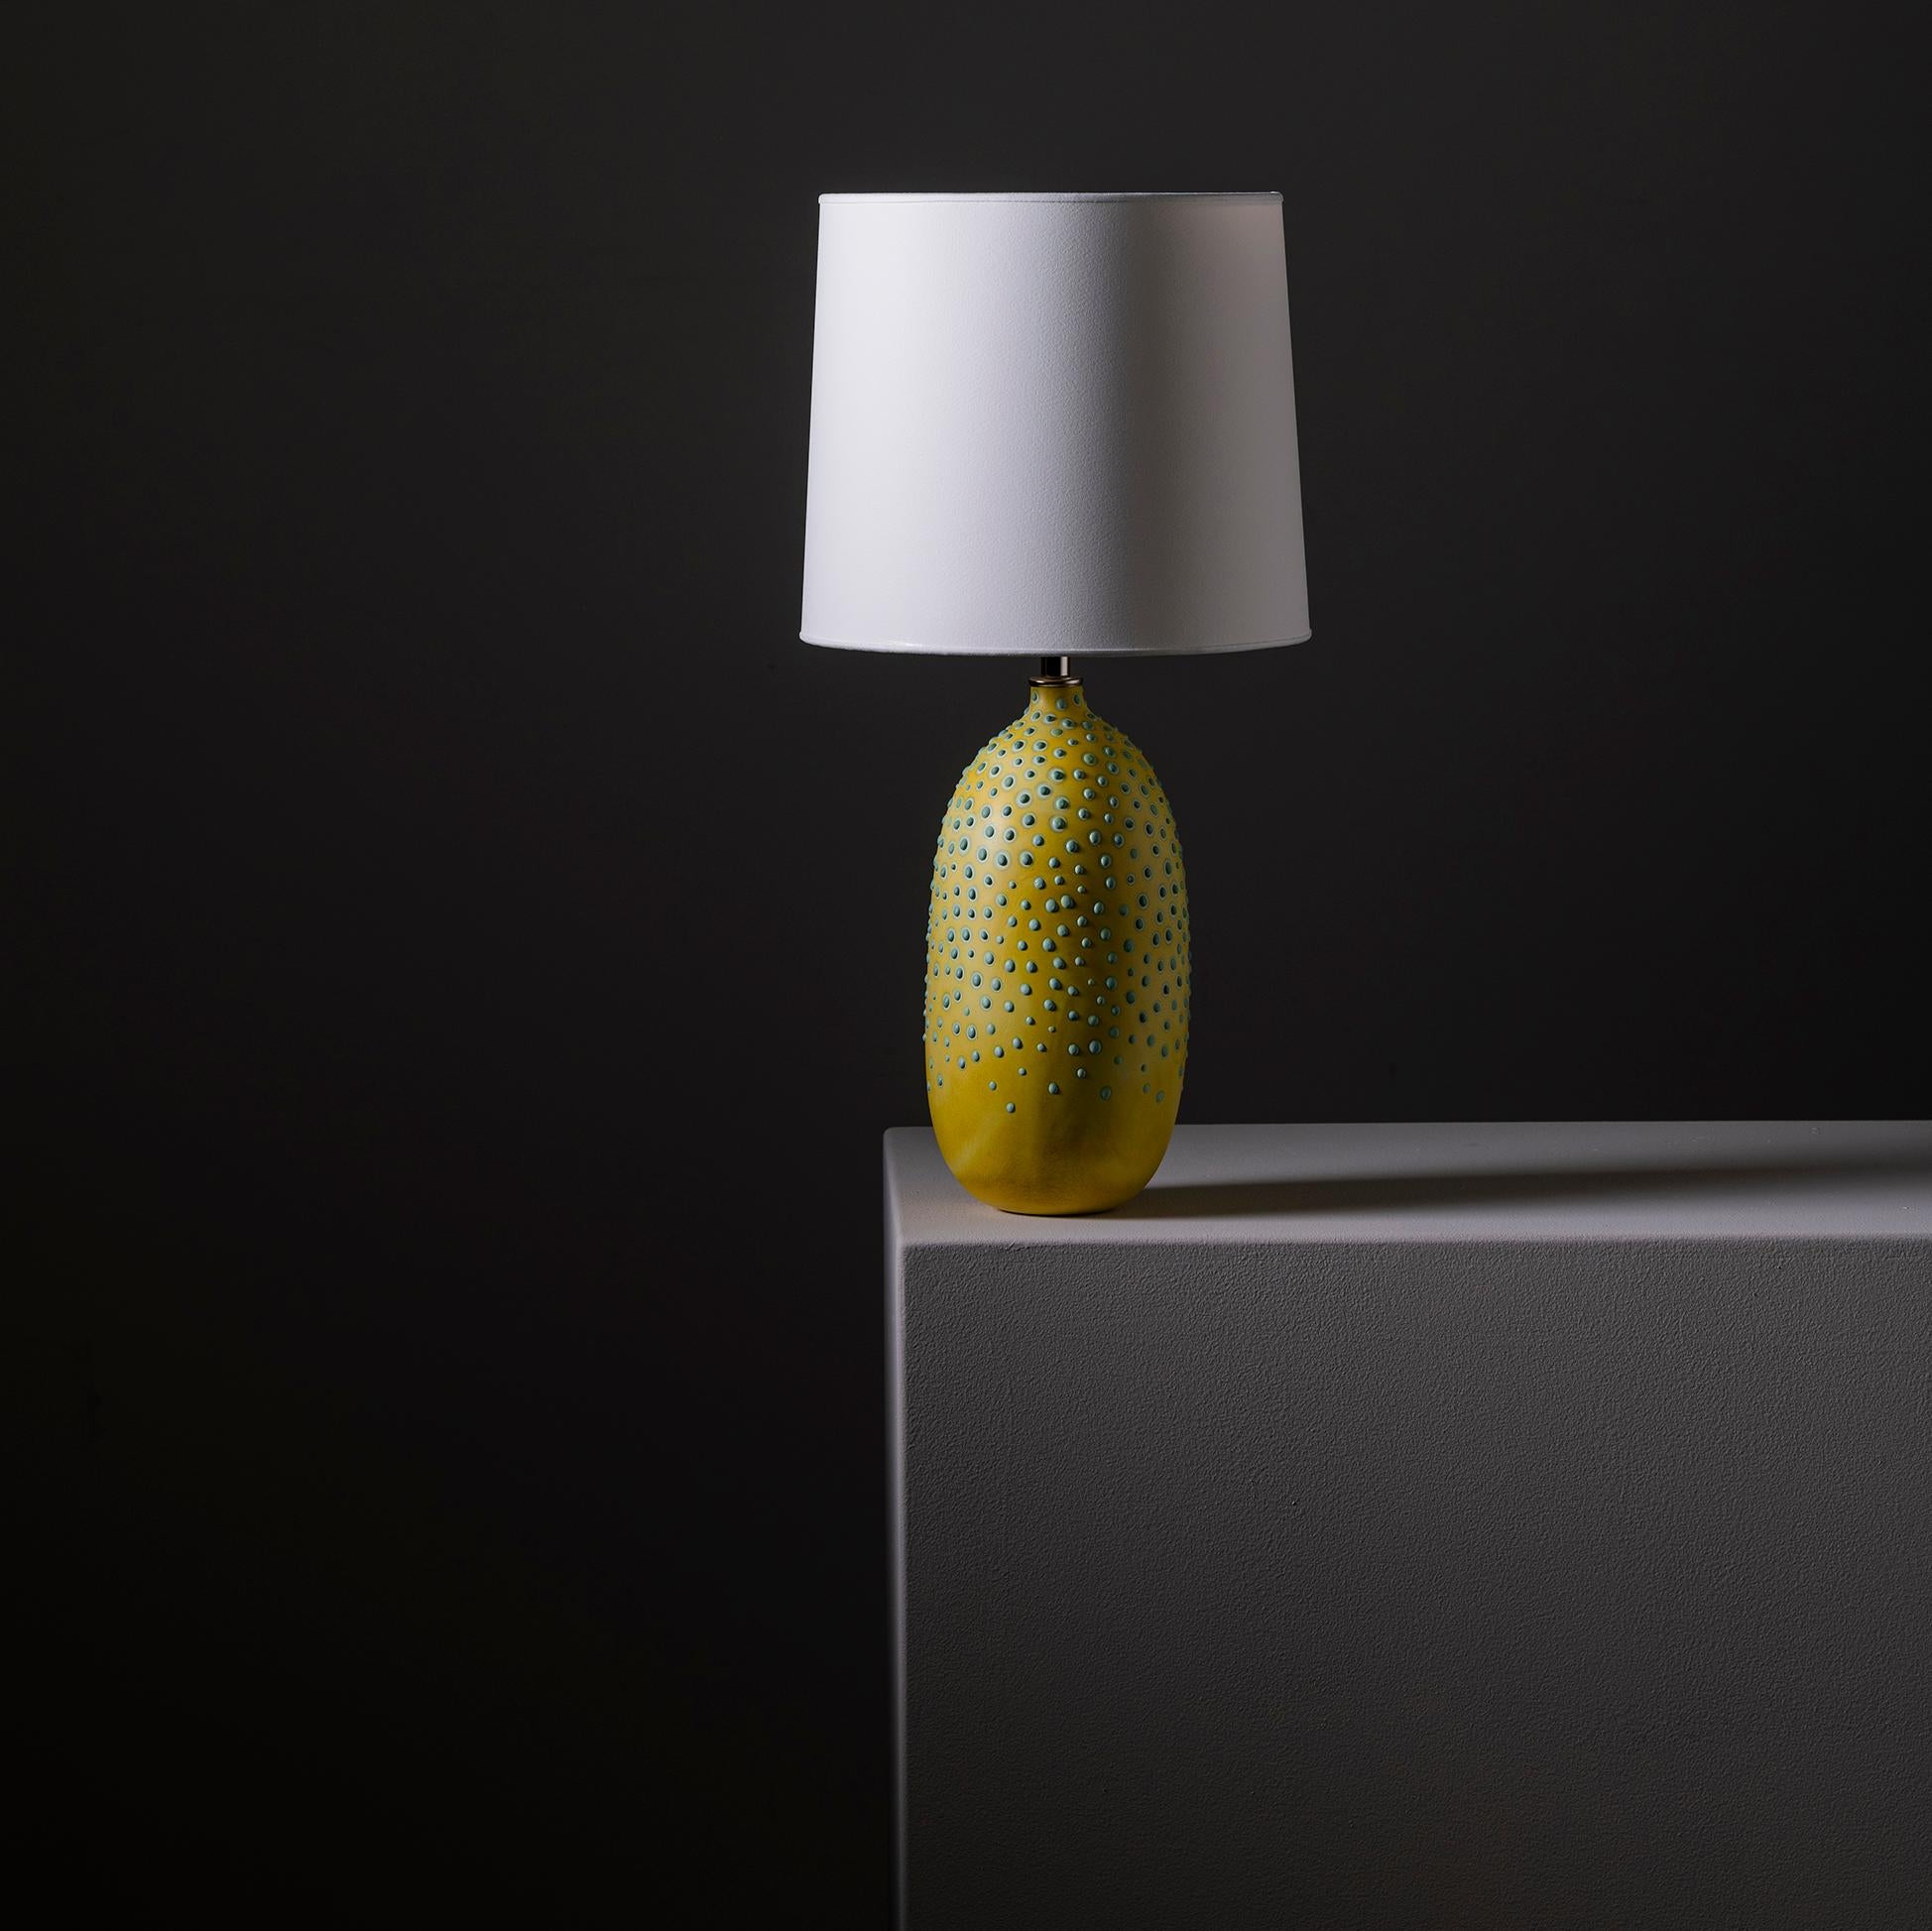 This collection is inspired by the unique galaxy of microorganisms living within each of us. We created a technique for dying and stippling each base that evokes the nature of microbes as they grow and colonize.

The base of each lamp is hand-cast